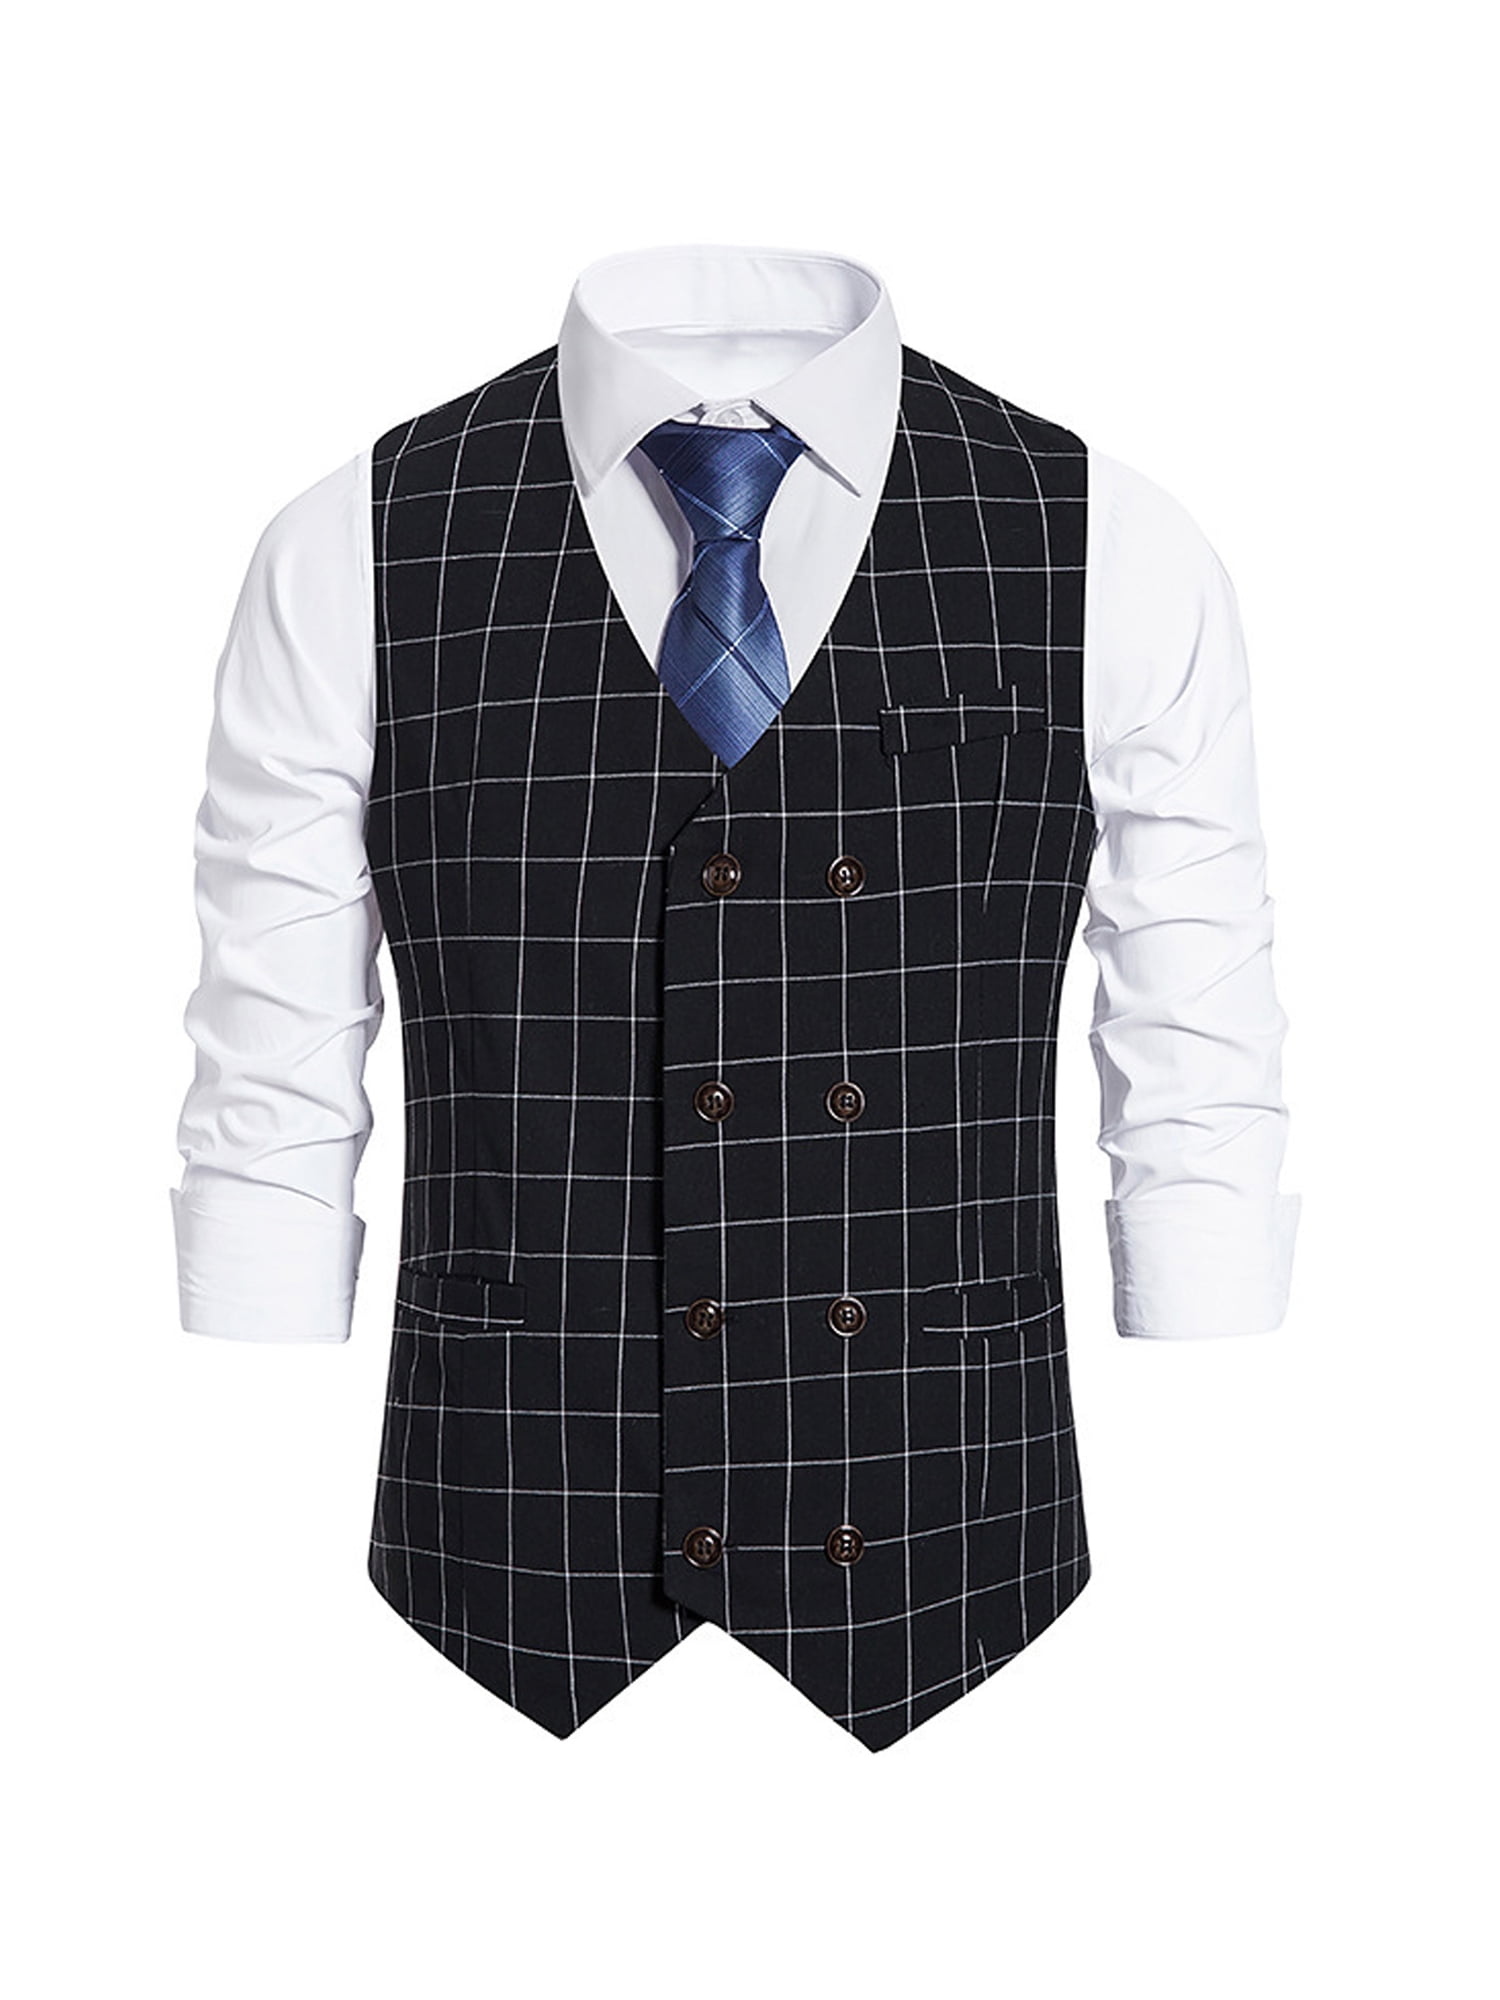 Men’s Vintage Double Breasted WaistcoatFormal Tailored Fit Smart Casual Vest 